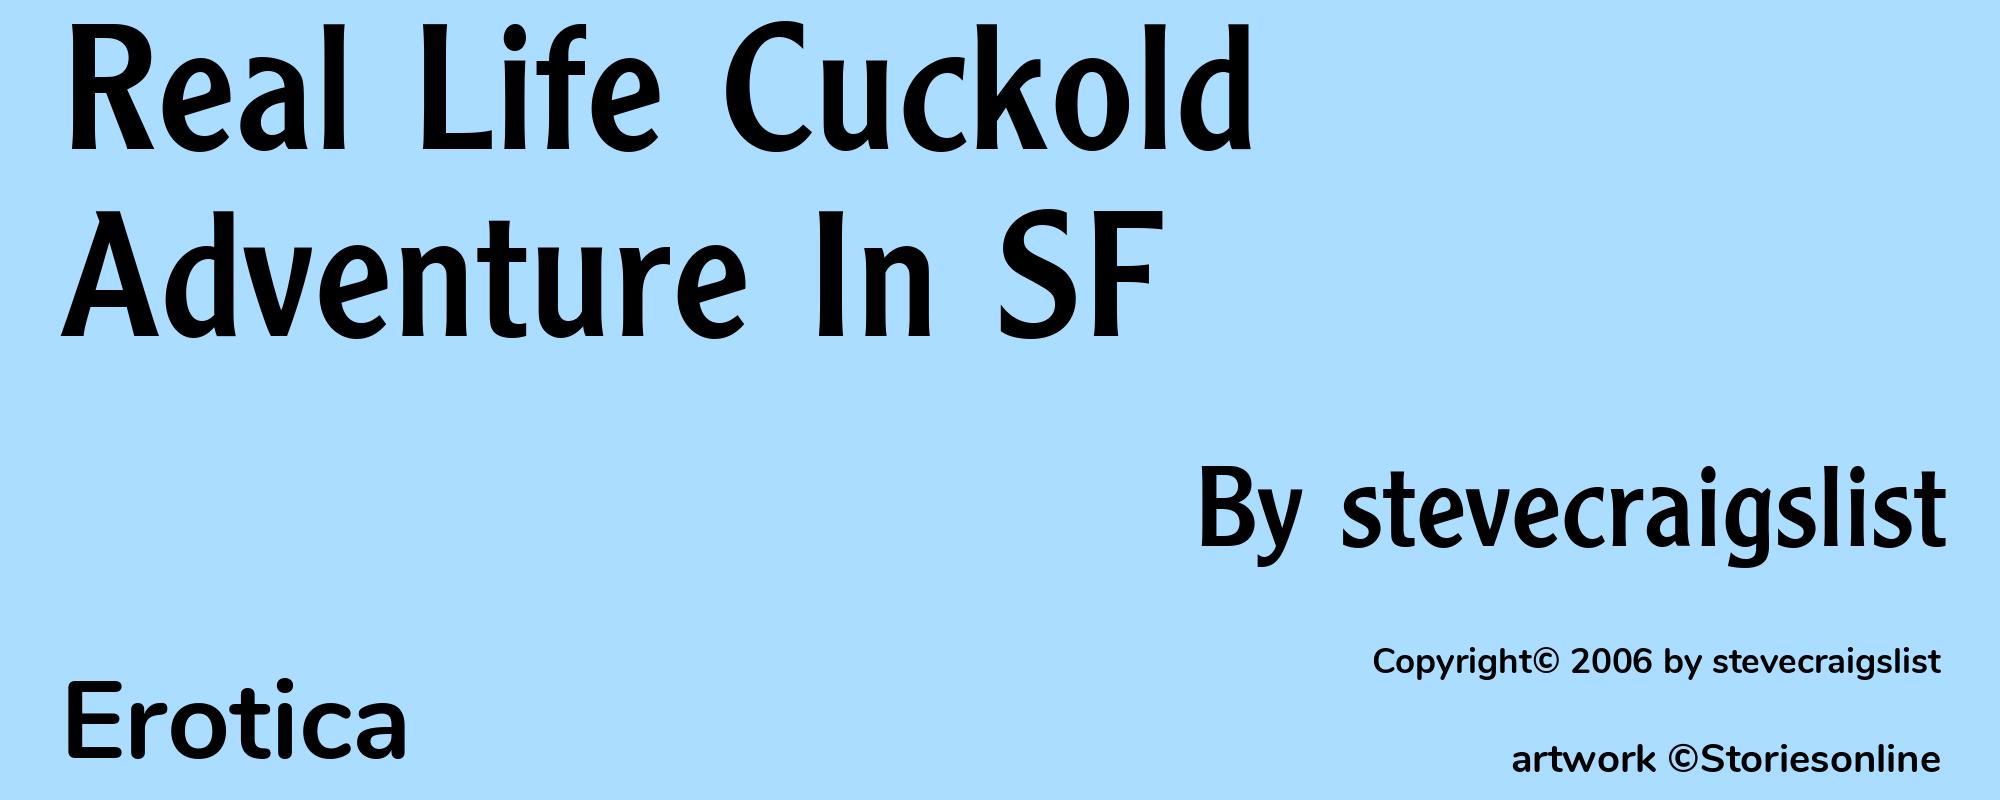 Real Life Cuckold Adventure In SF - Cover